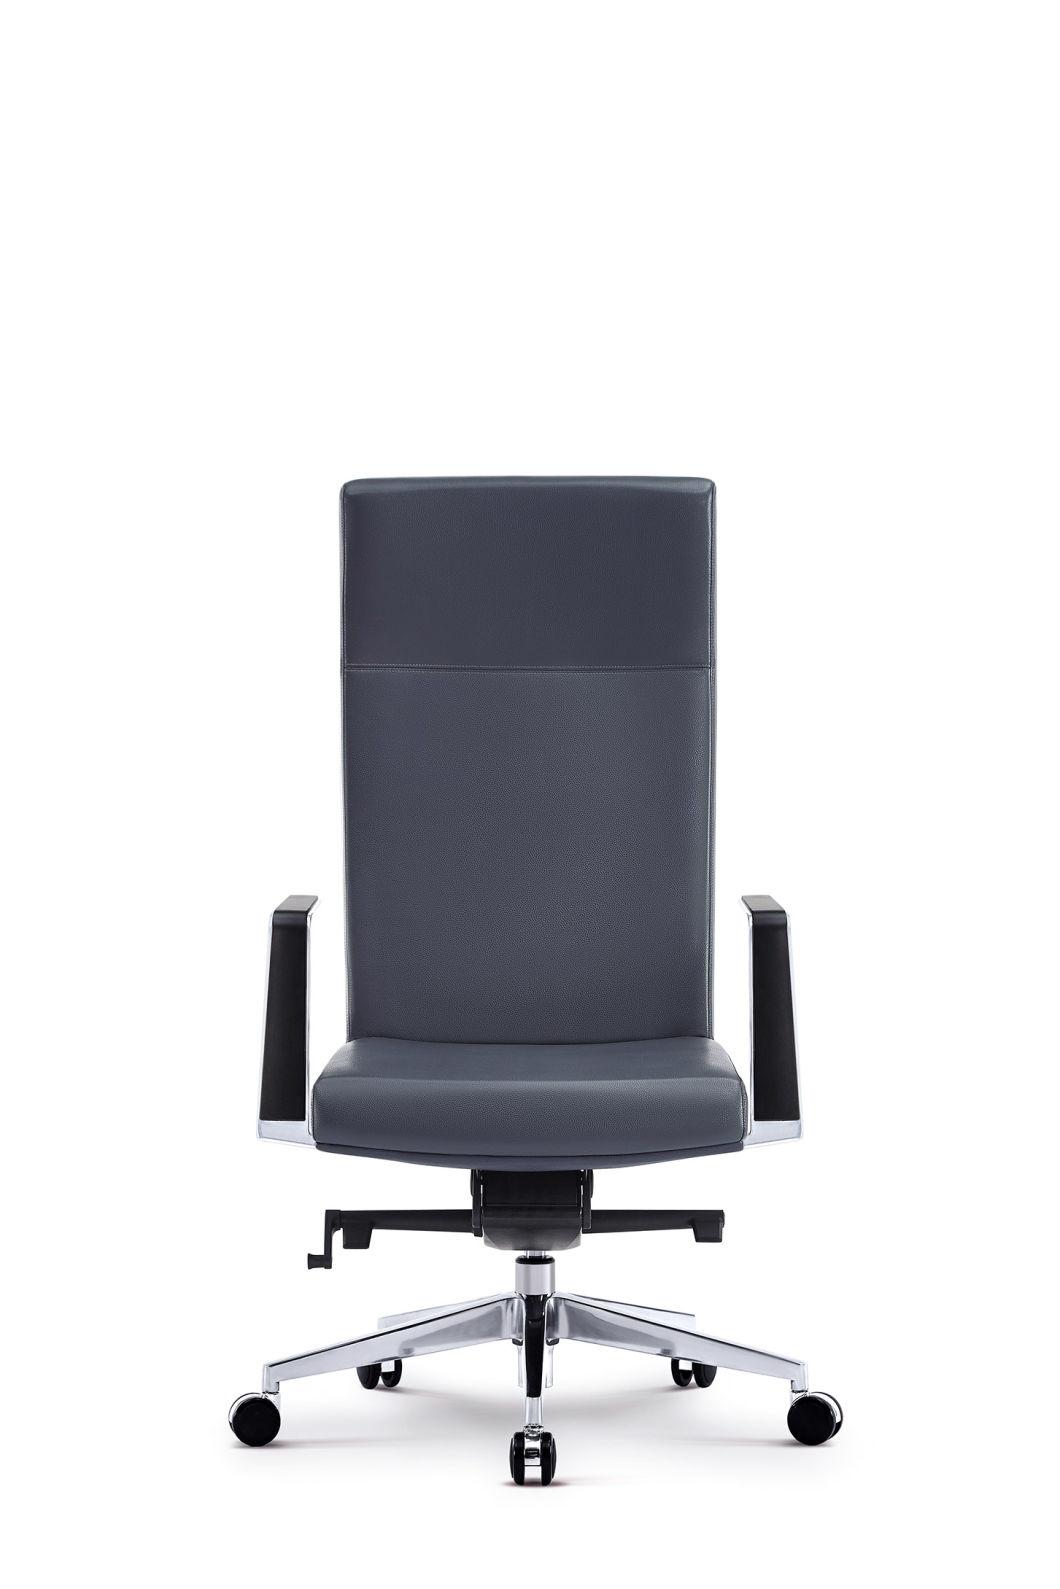 Yifa High Quality Modern Office Chairs for Home Office Room